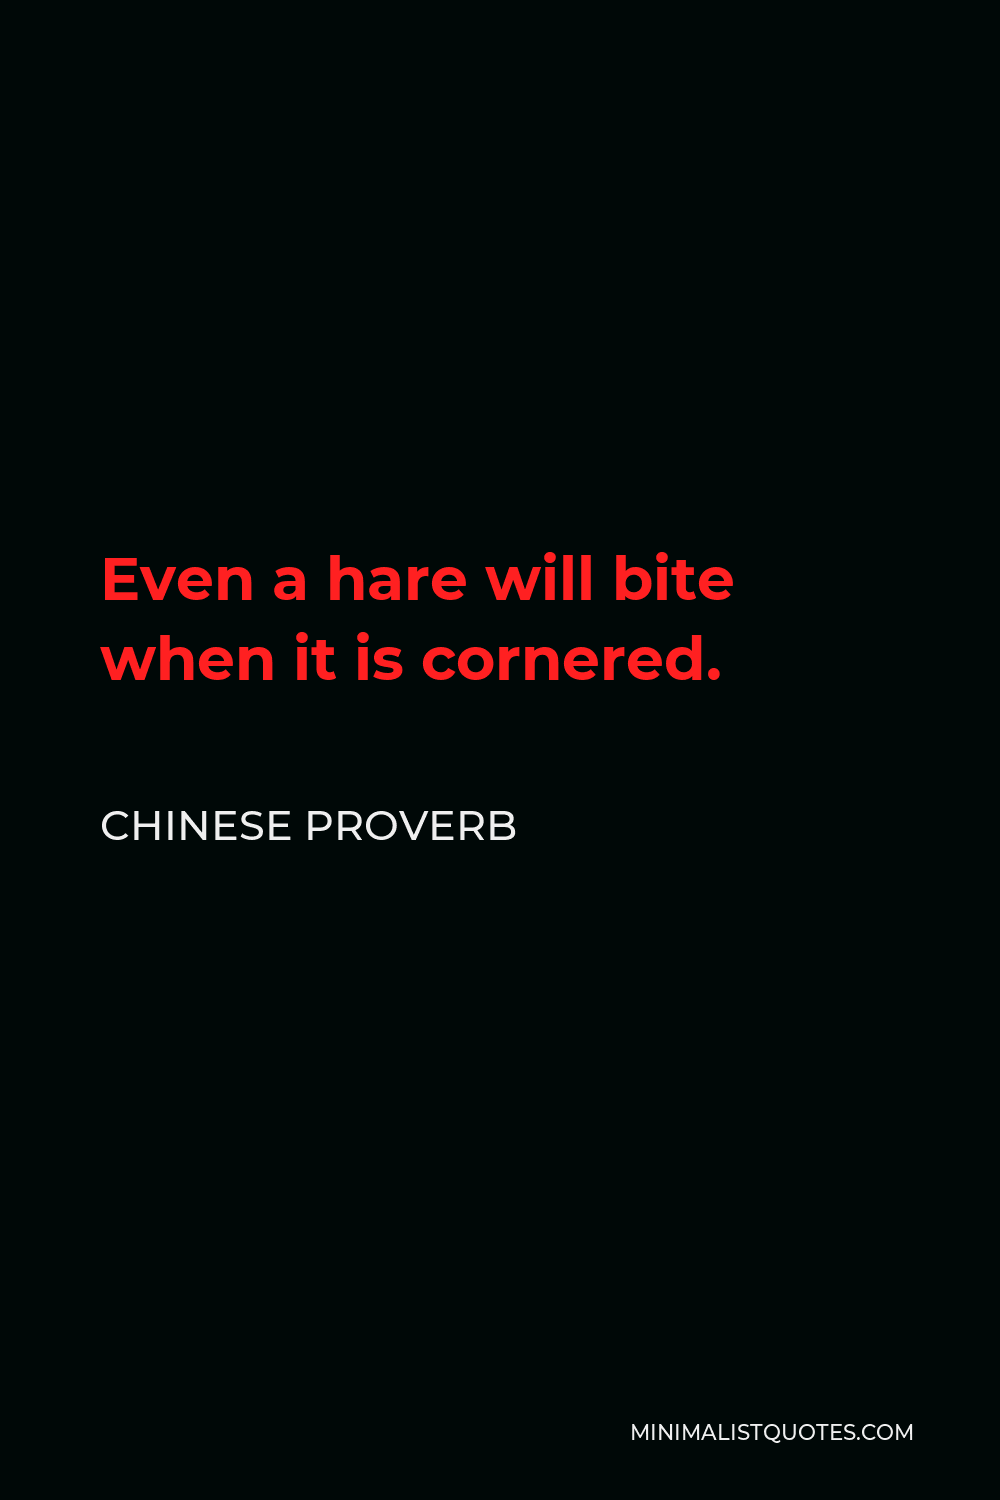 Chinese Proverb Quote - Even a hare will bite when it is cornered.